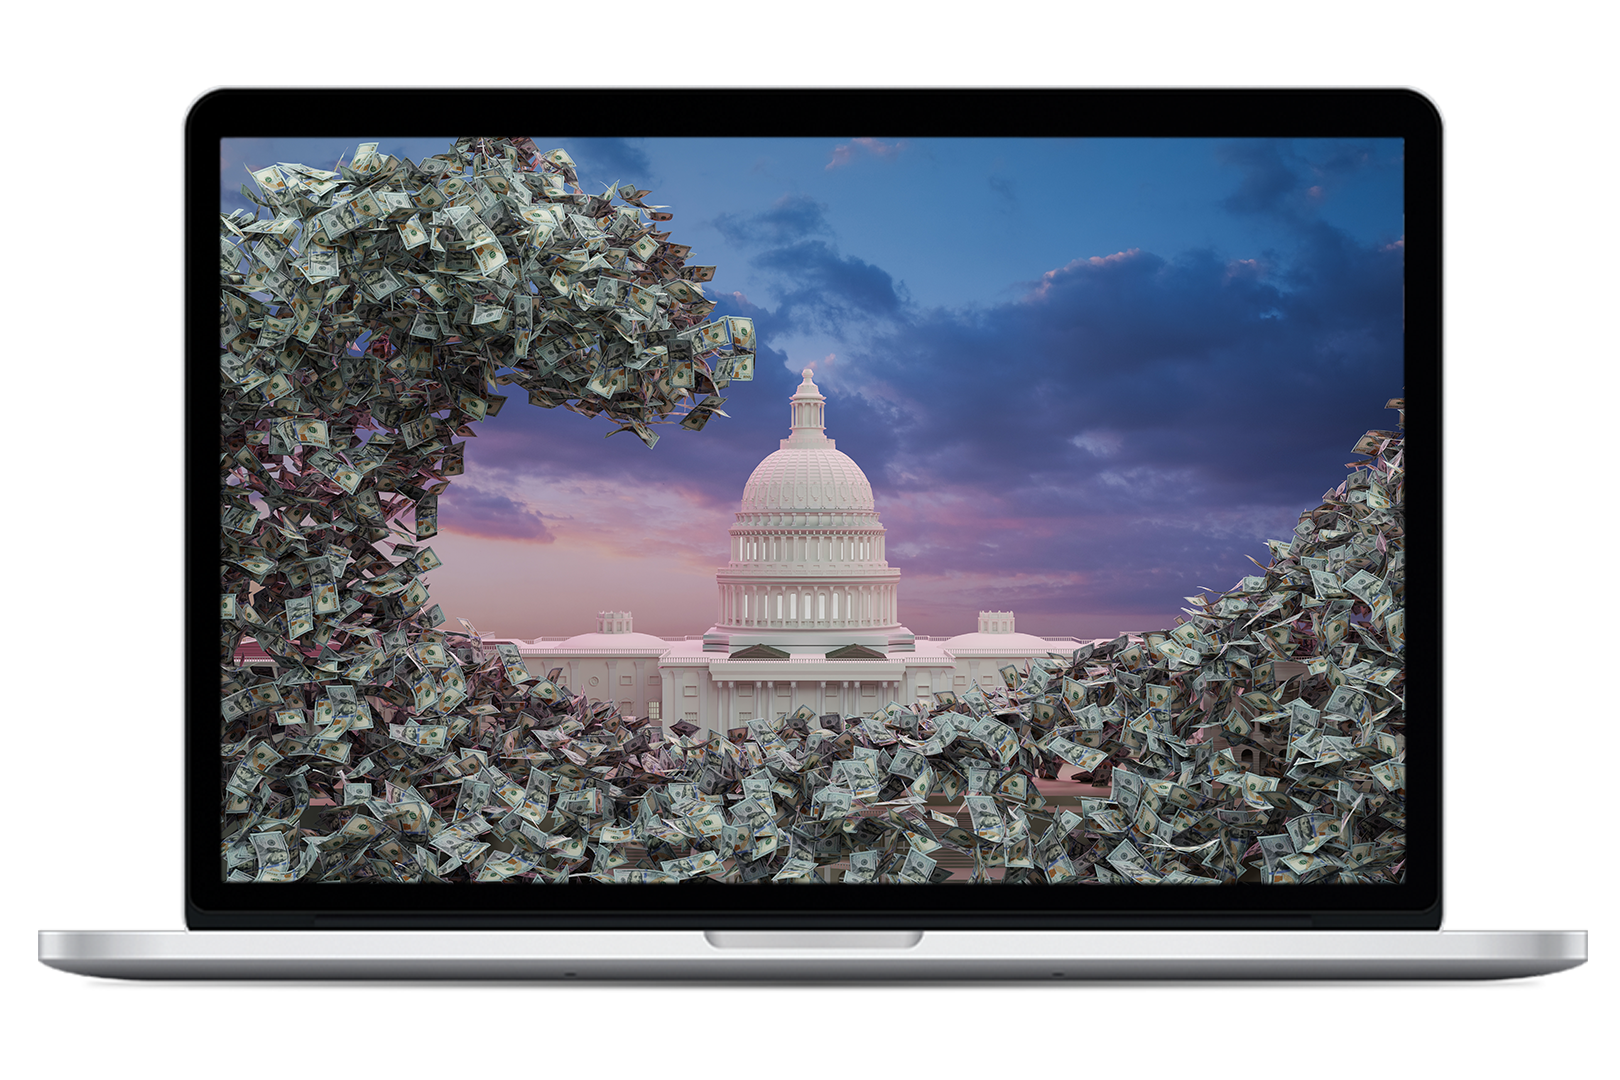 Laptop displaying an image of a wave of cash in front of a government building 